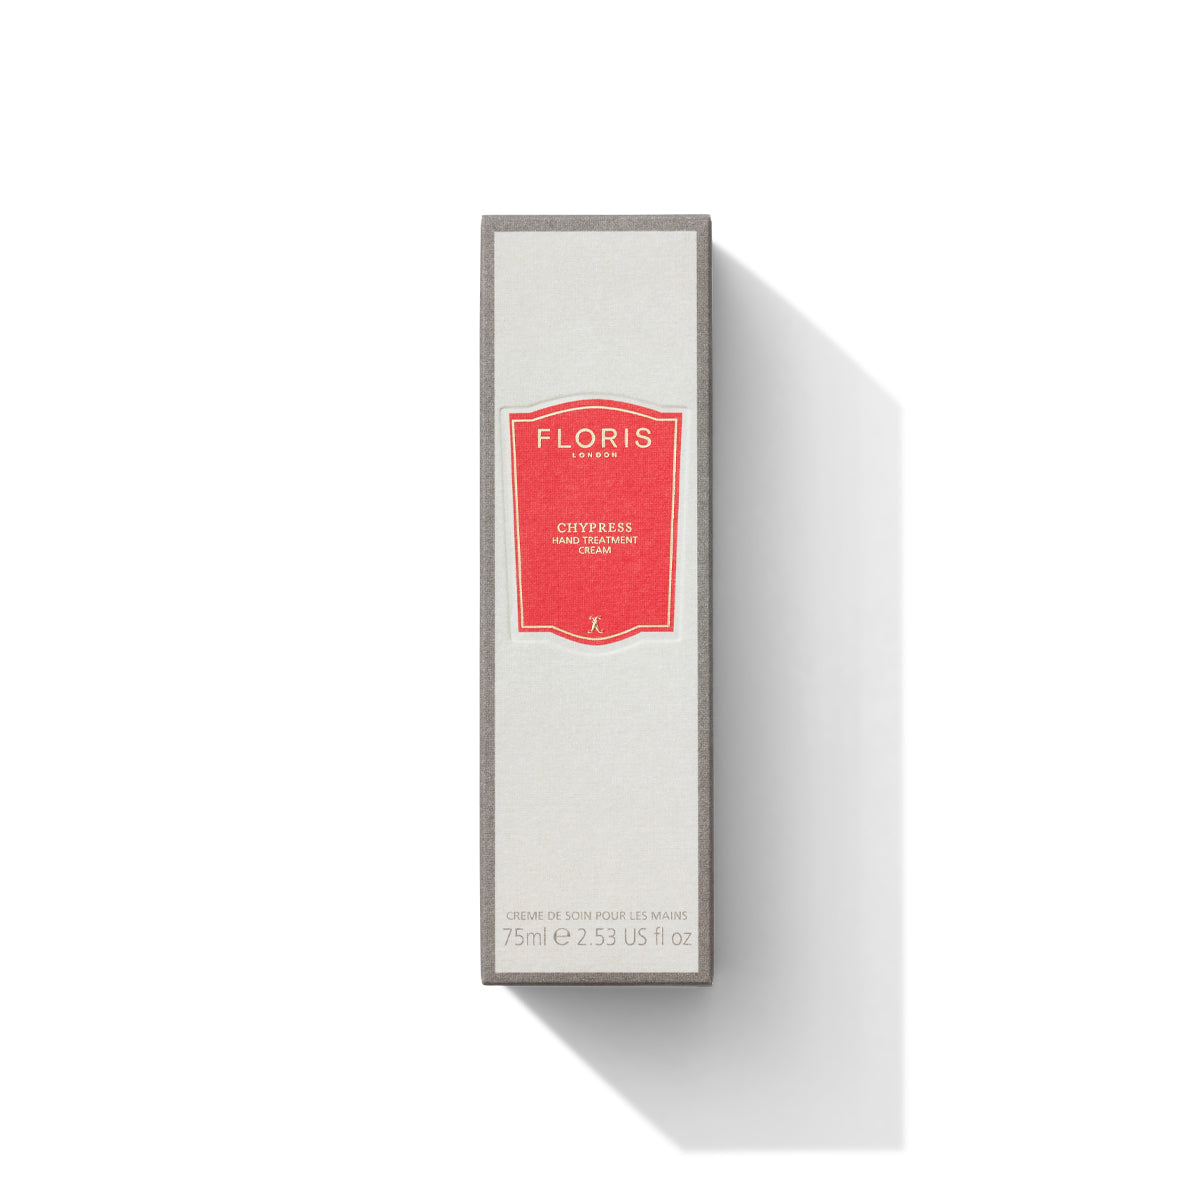 white and red box by floris